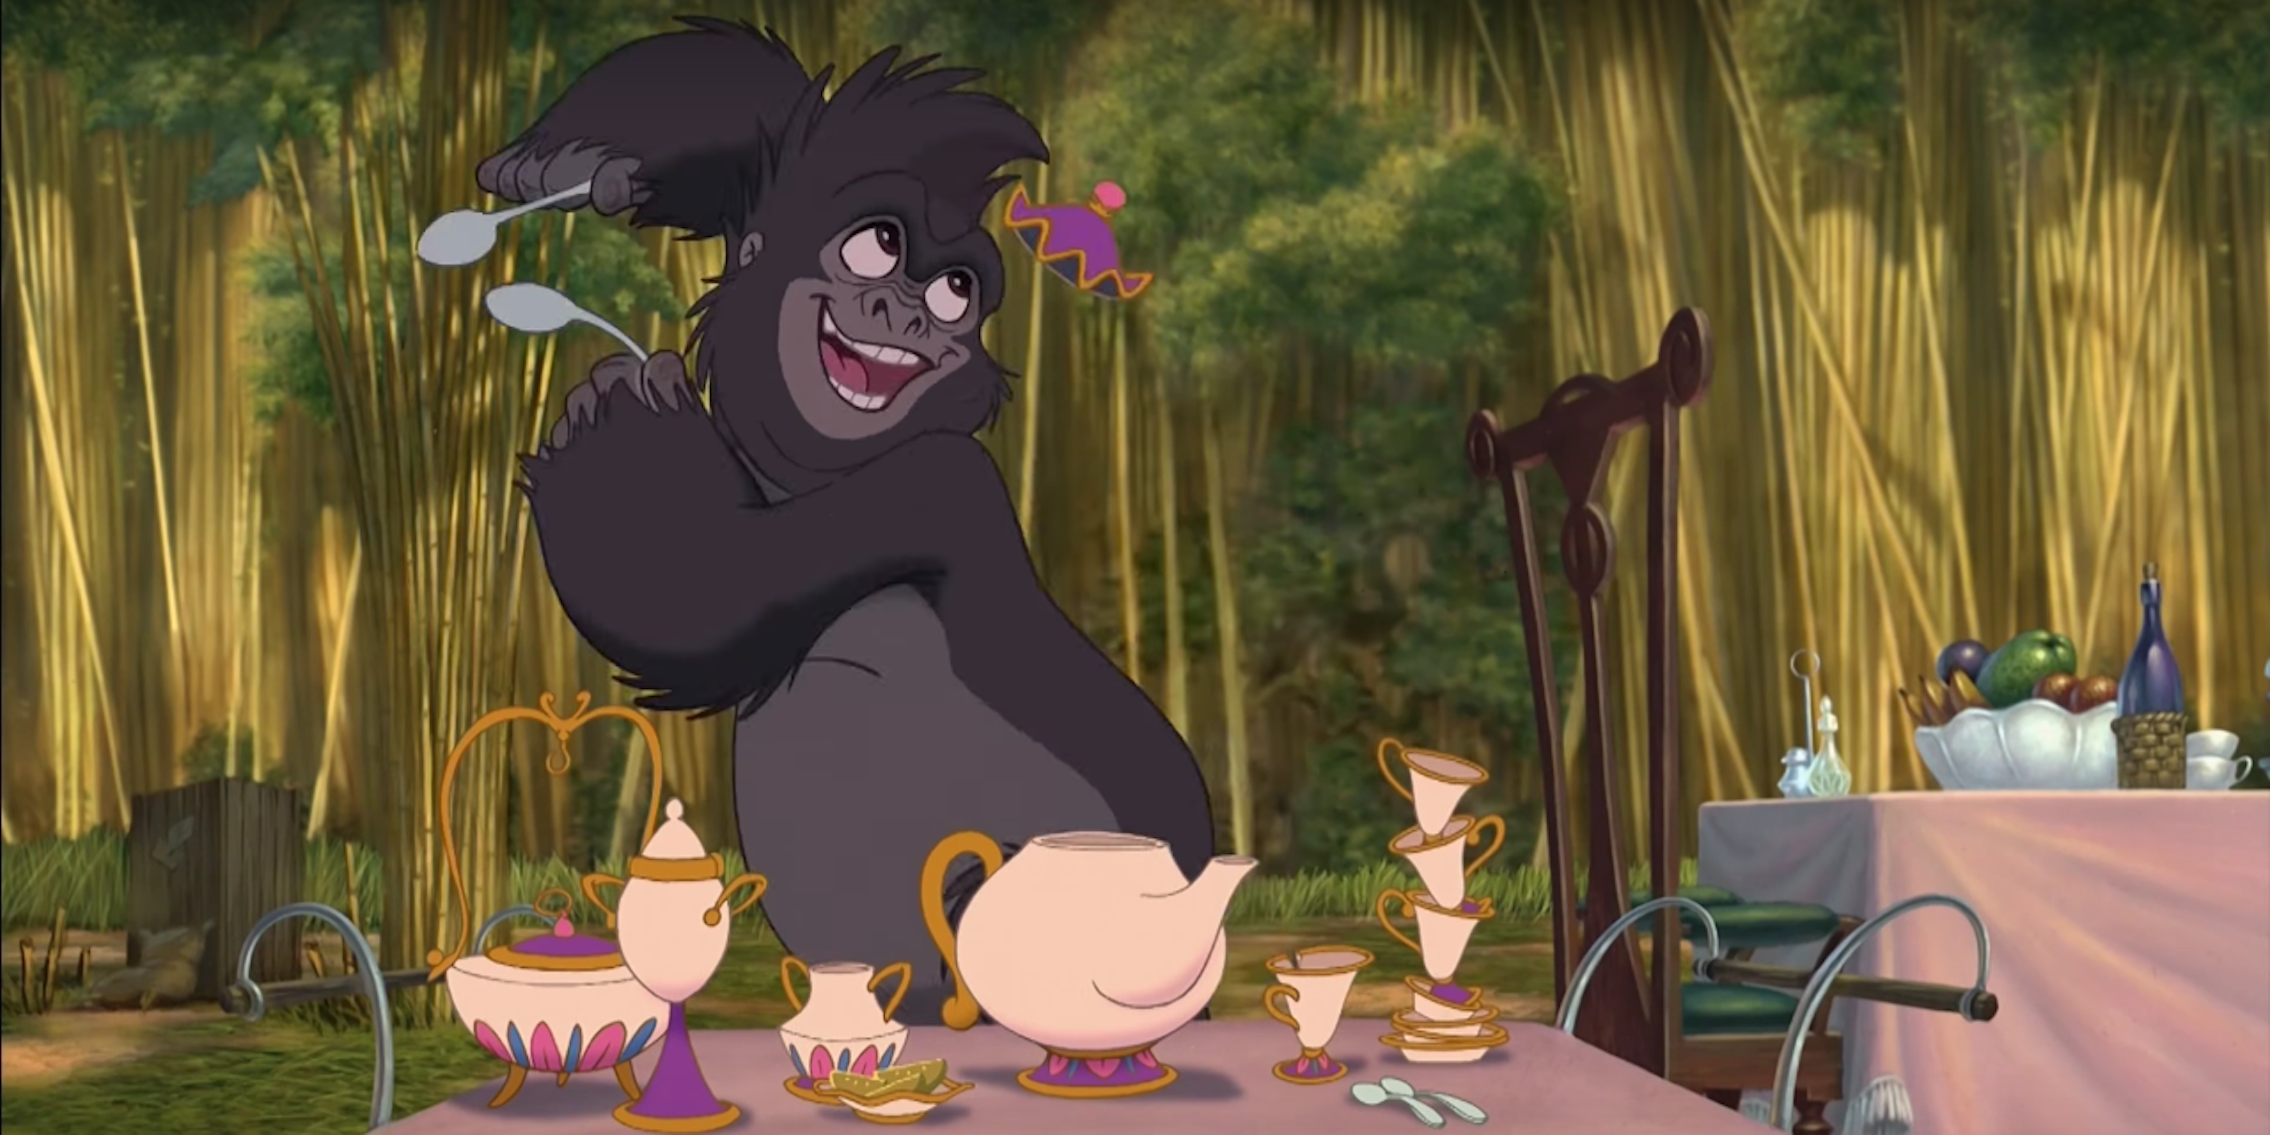 A still from 'Tarzan' featuring a Disney animation Easter egg: Mrs. Potts from Beauty and the Beast.